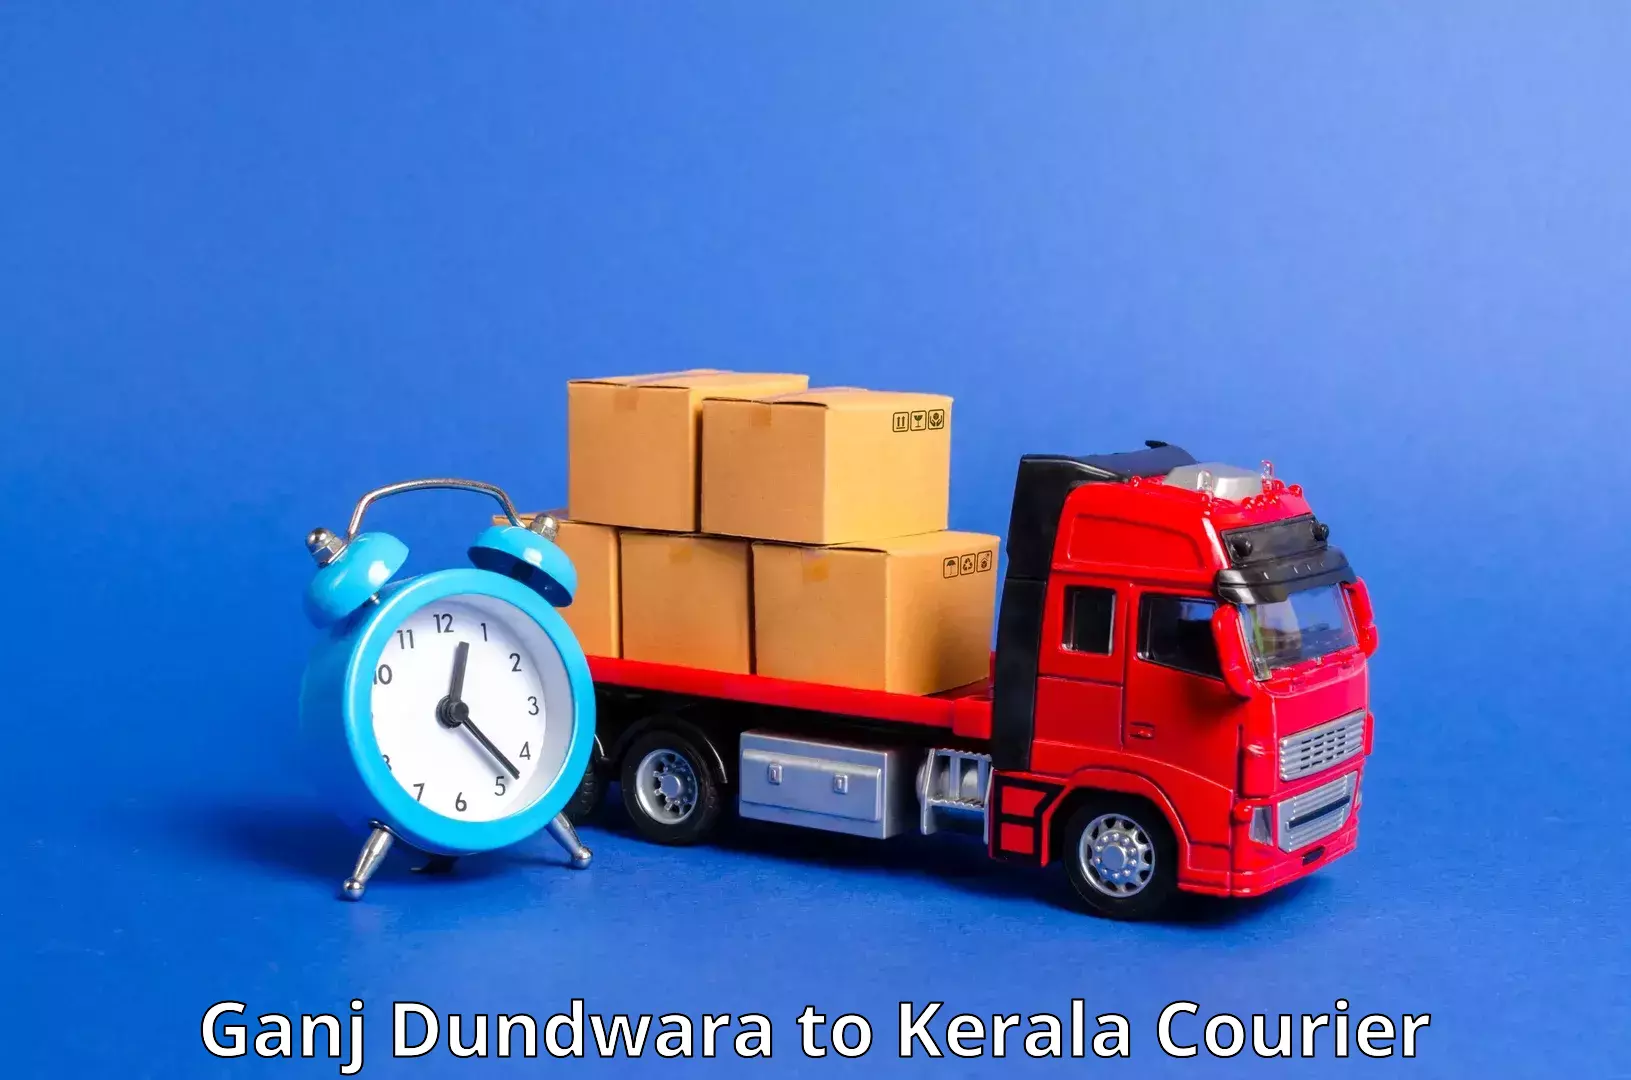 Reliable delivery network Ganj Dundwara to Rajamudy